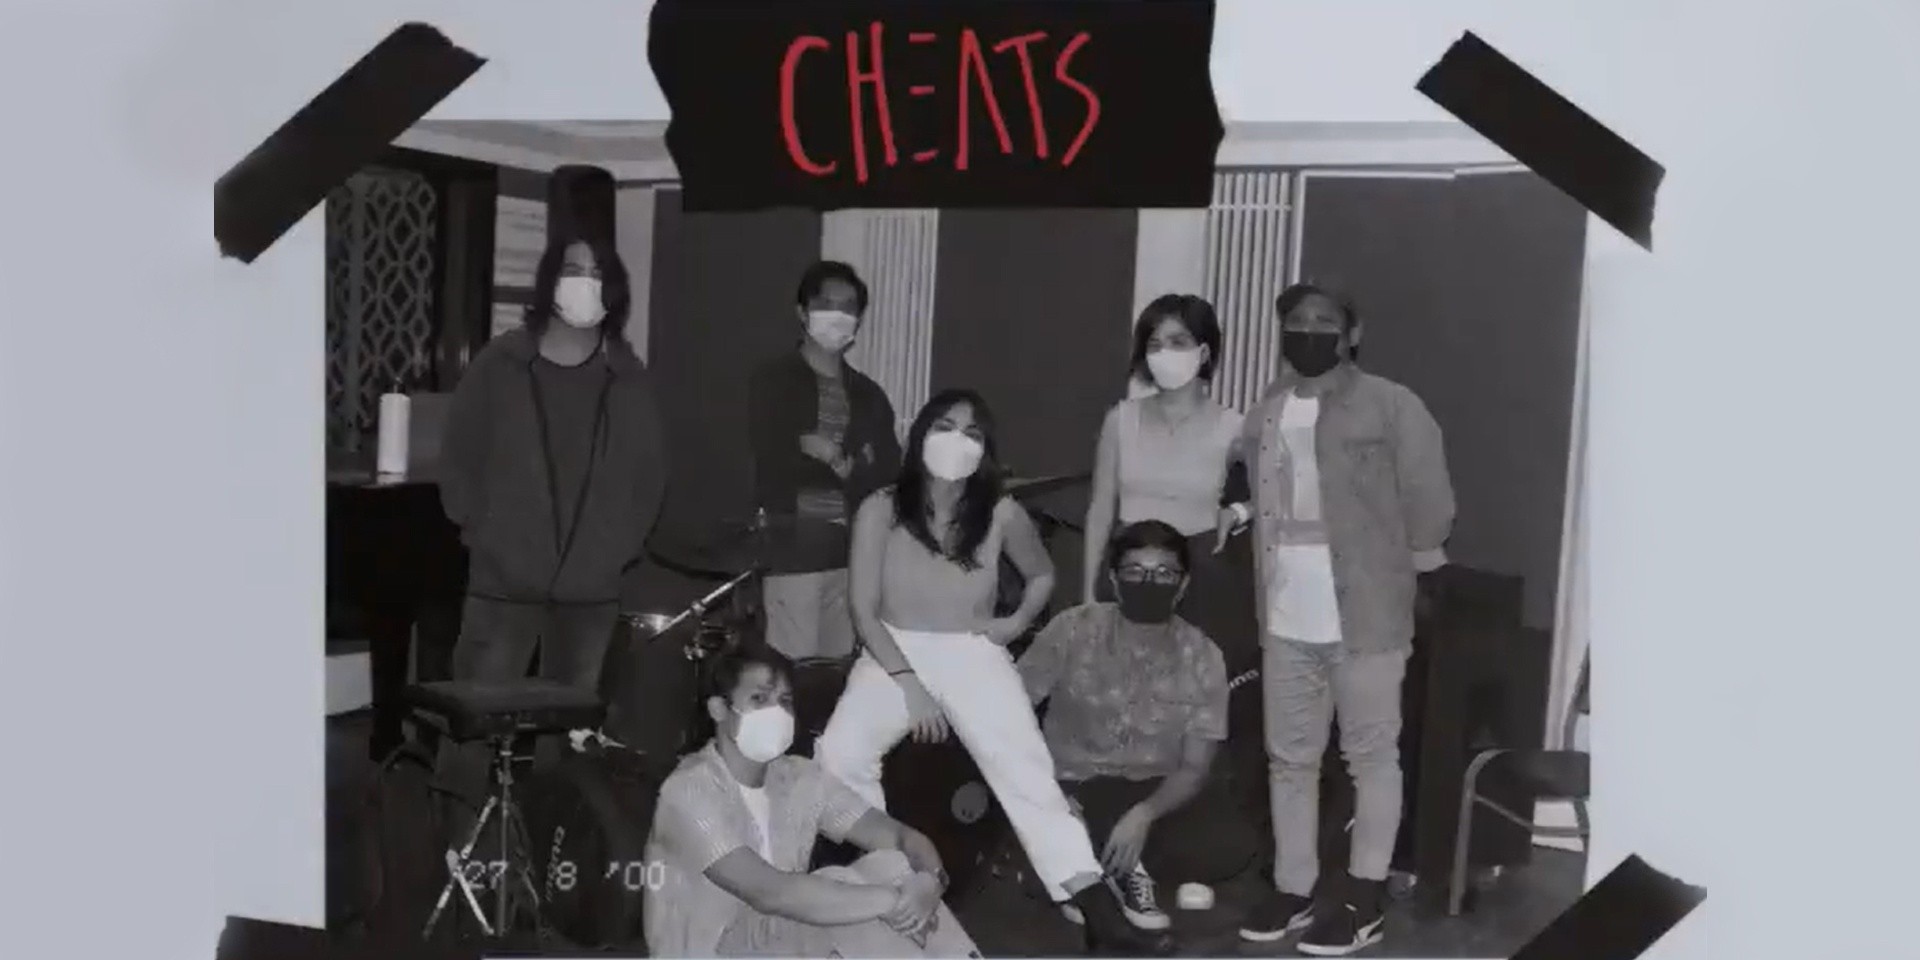 Cheats sign with Island Records Philippines